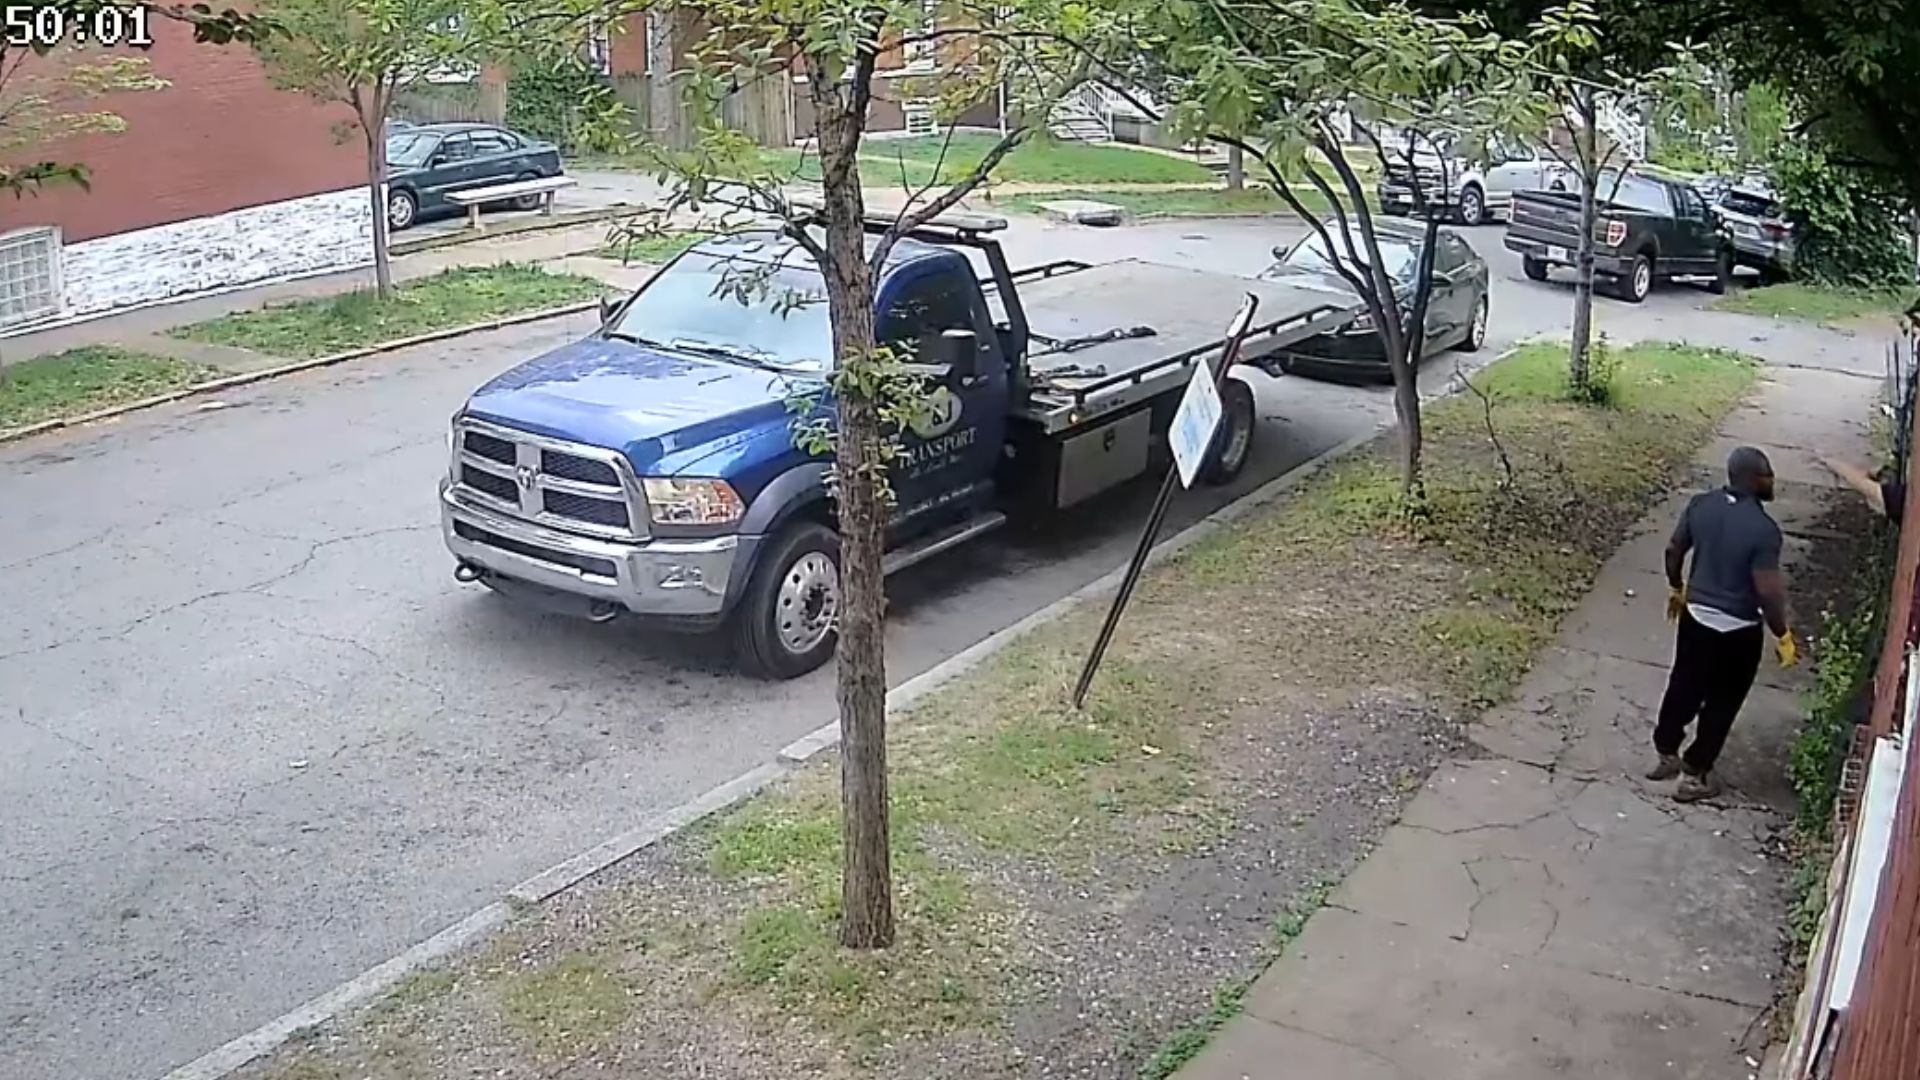 Tow Truck Used To Steal Cars In St. Louis